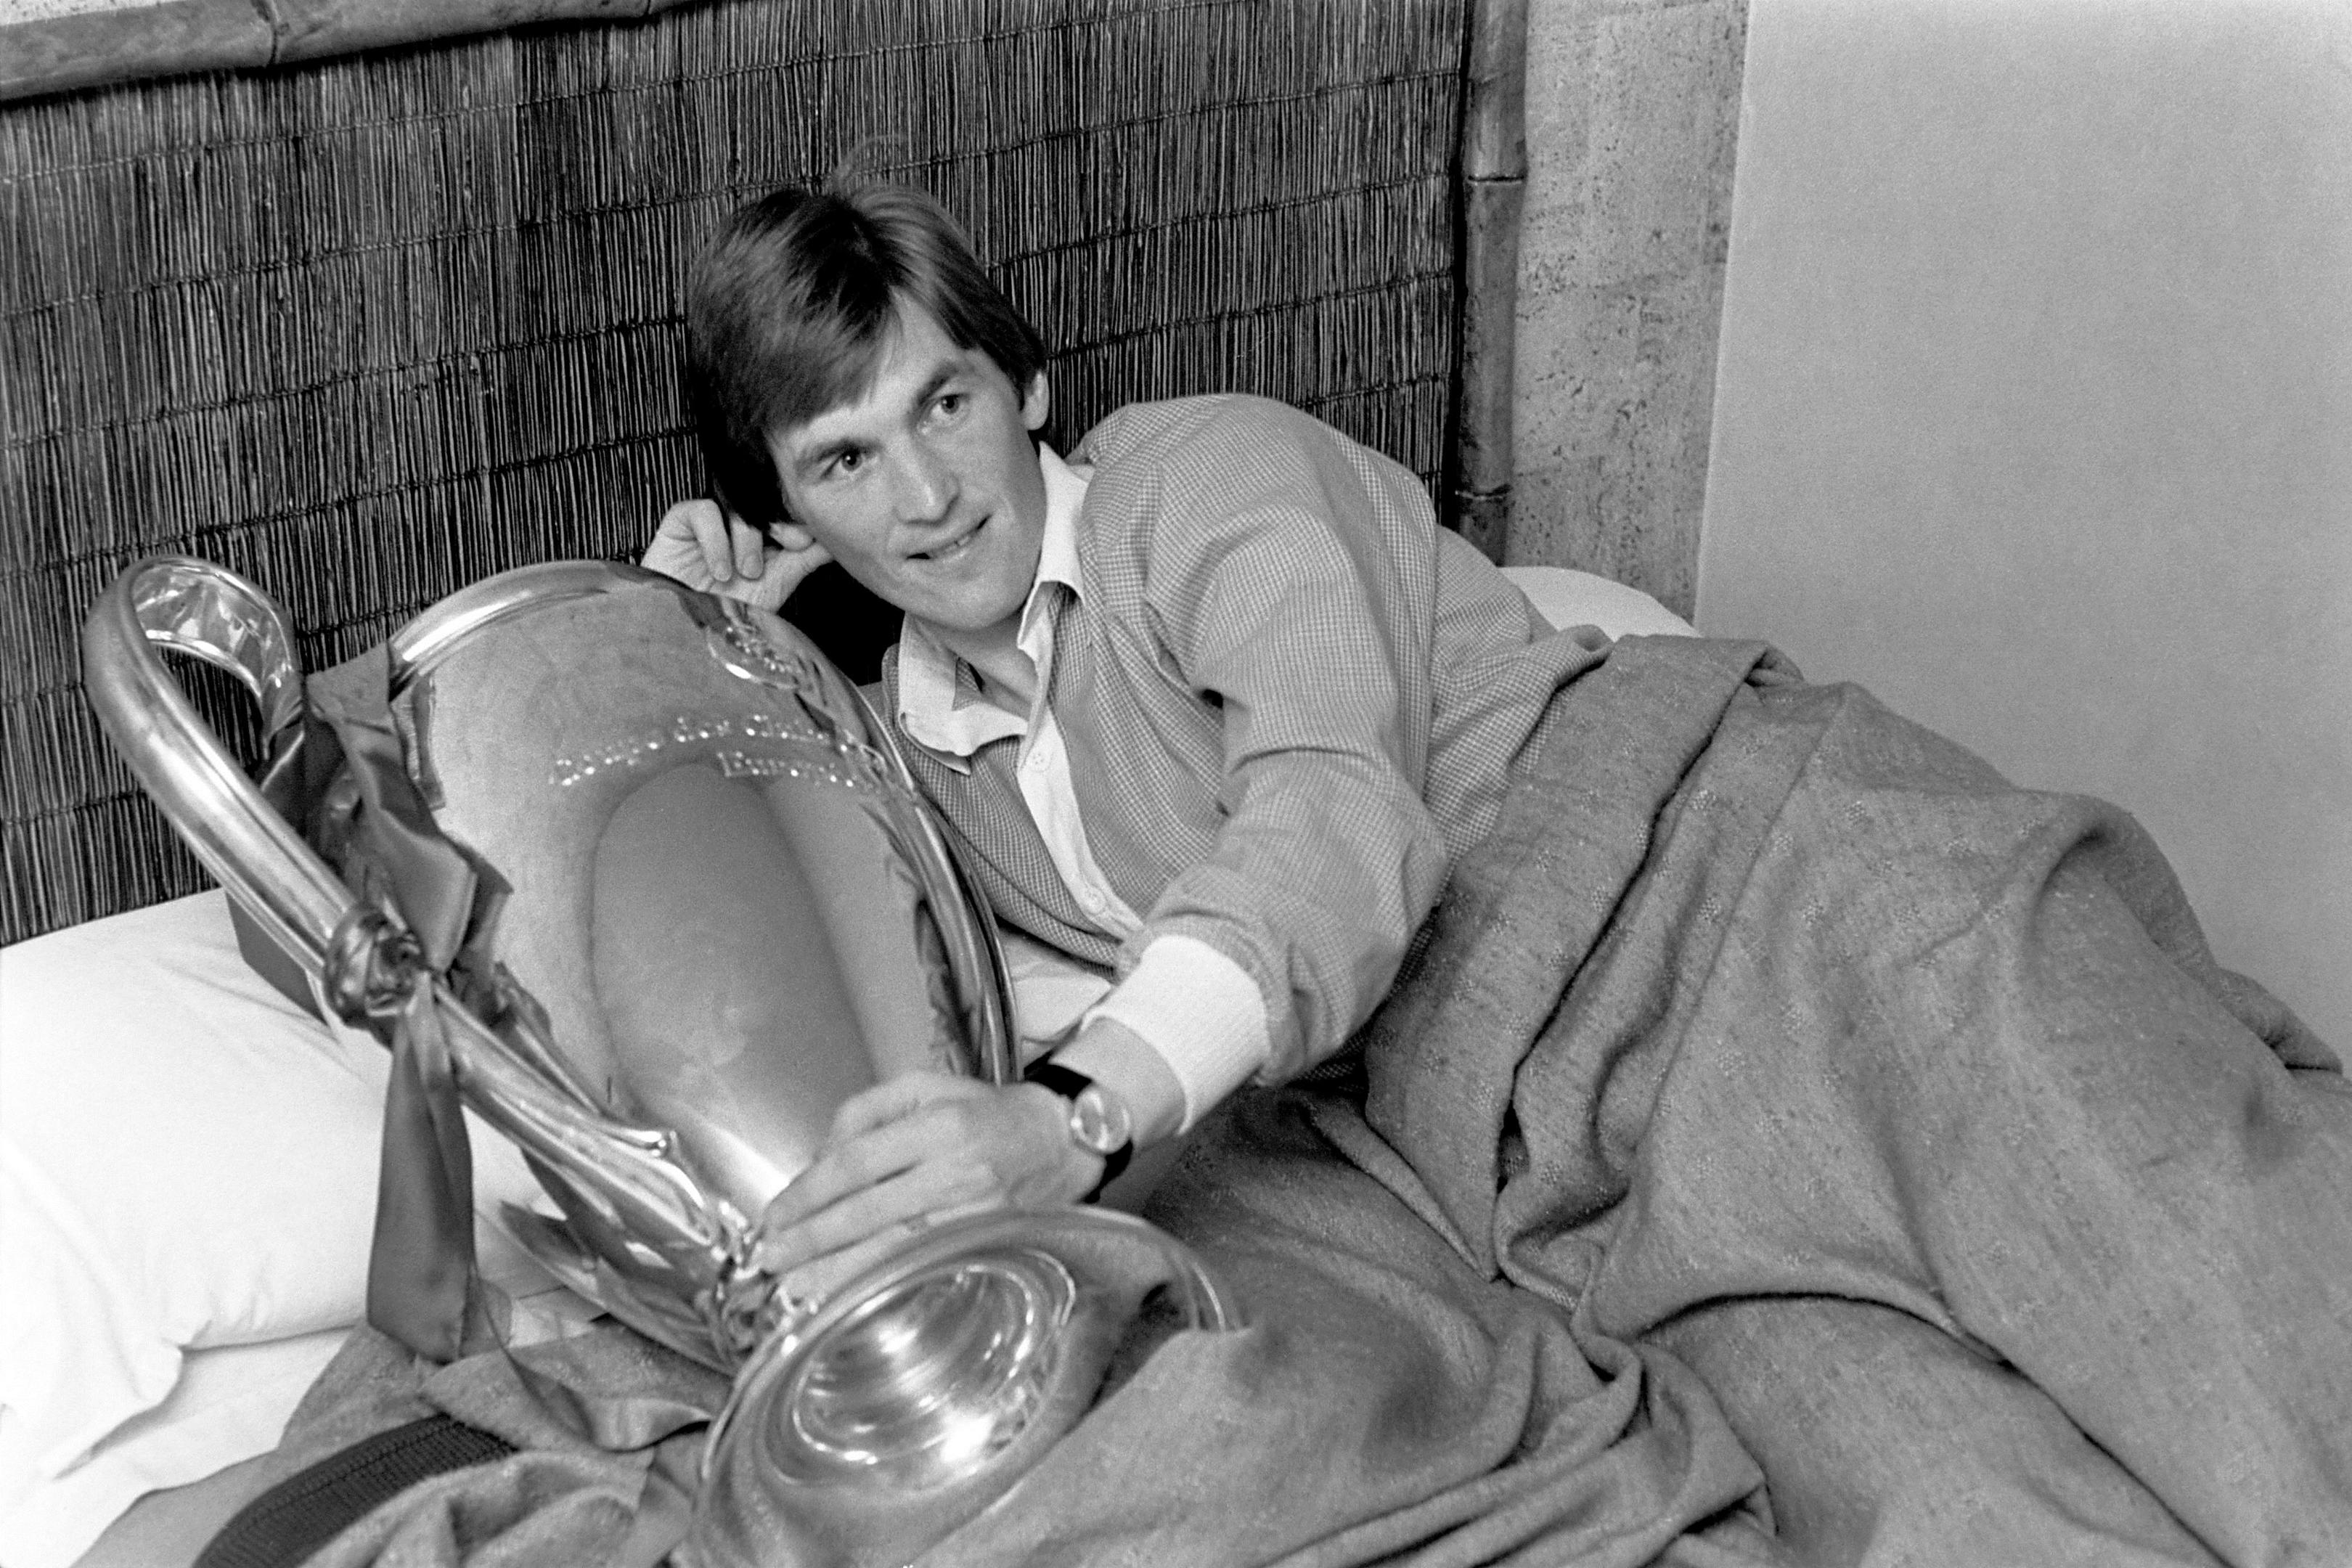 Kenny Dalglish woke up with the European Cup after scoring Liverpool’s winner against Club Brugge in 1978 (PA Archive)